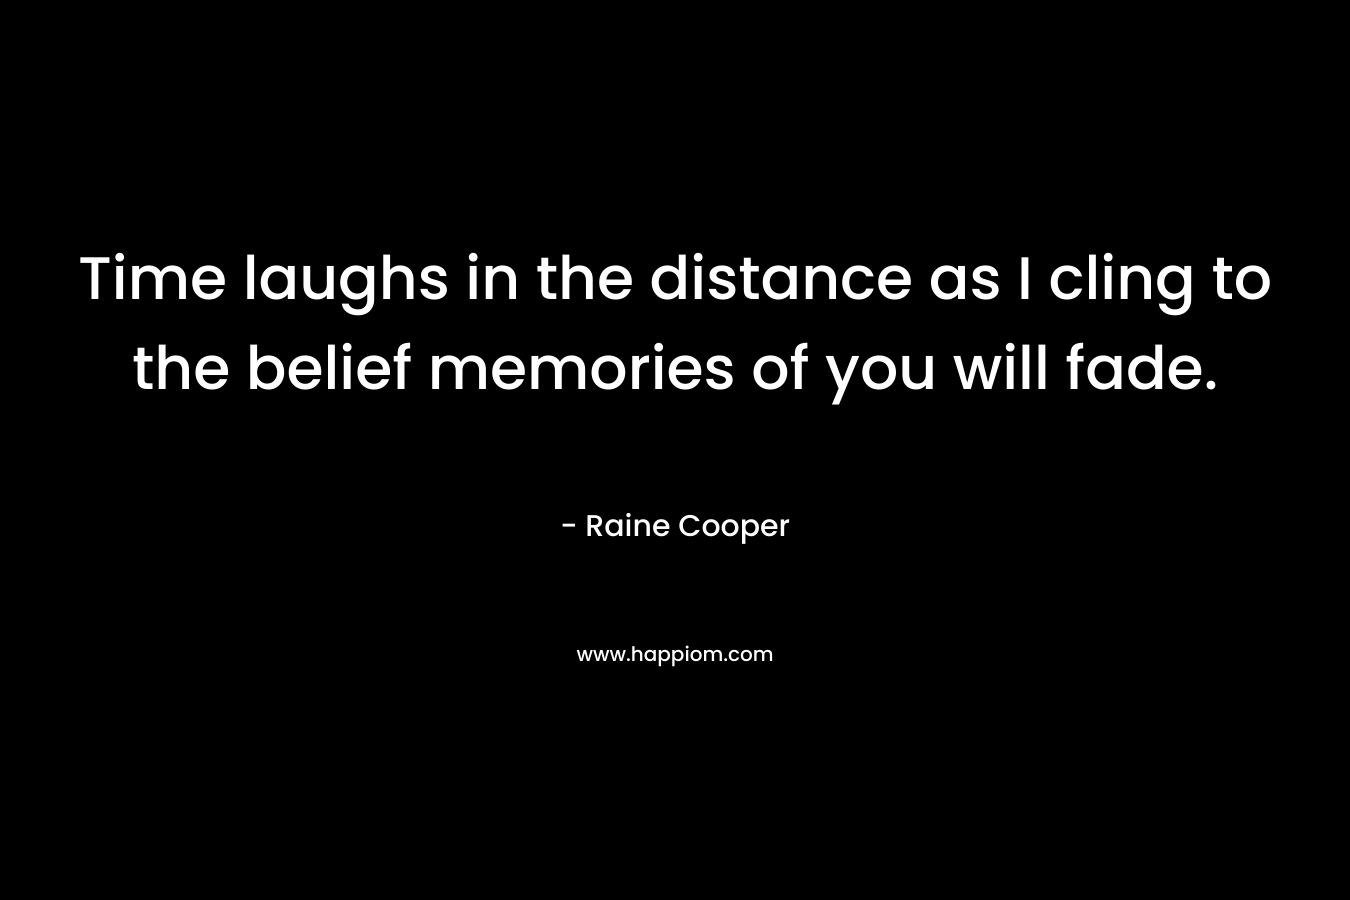 Time laughs in the distance as I cling to the belief memories of you will fade. – Raine Cooper